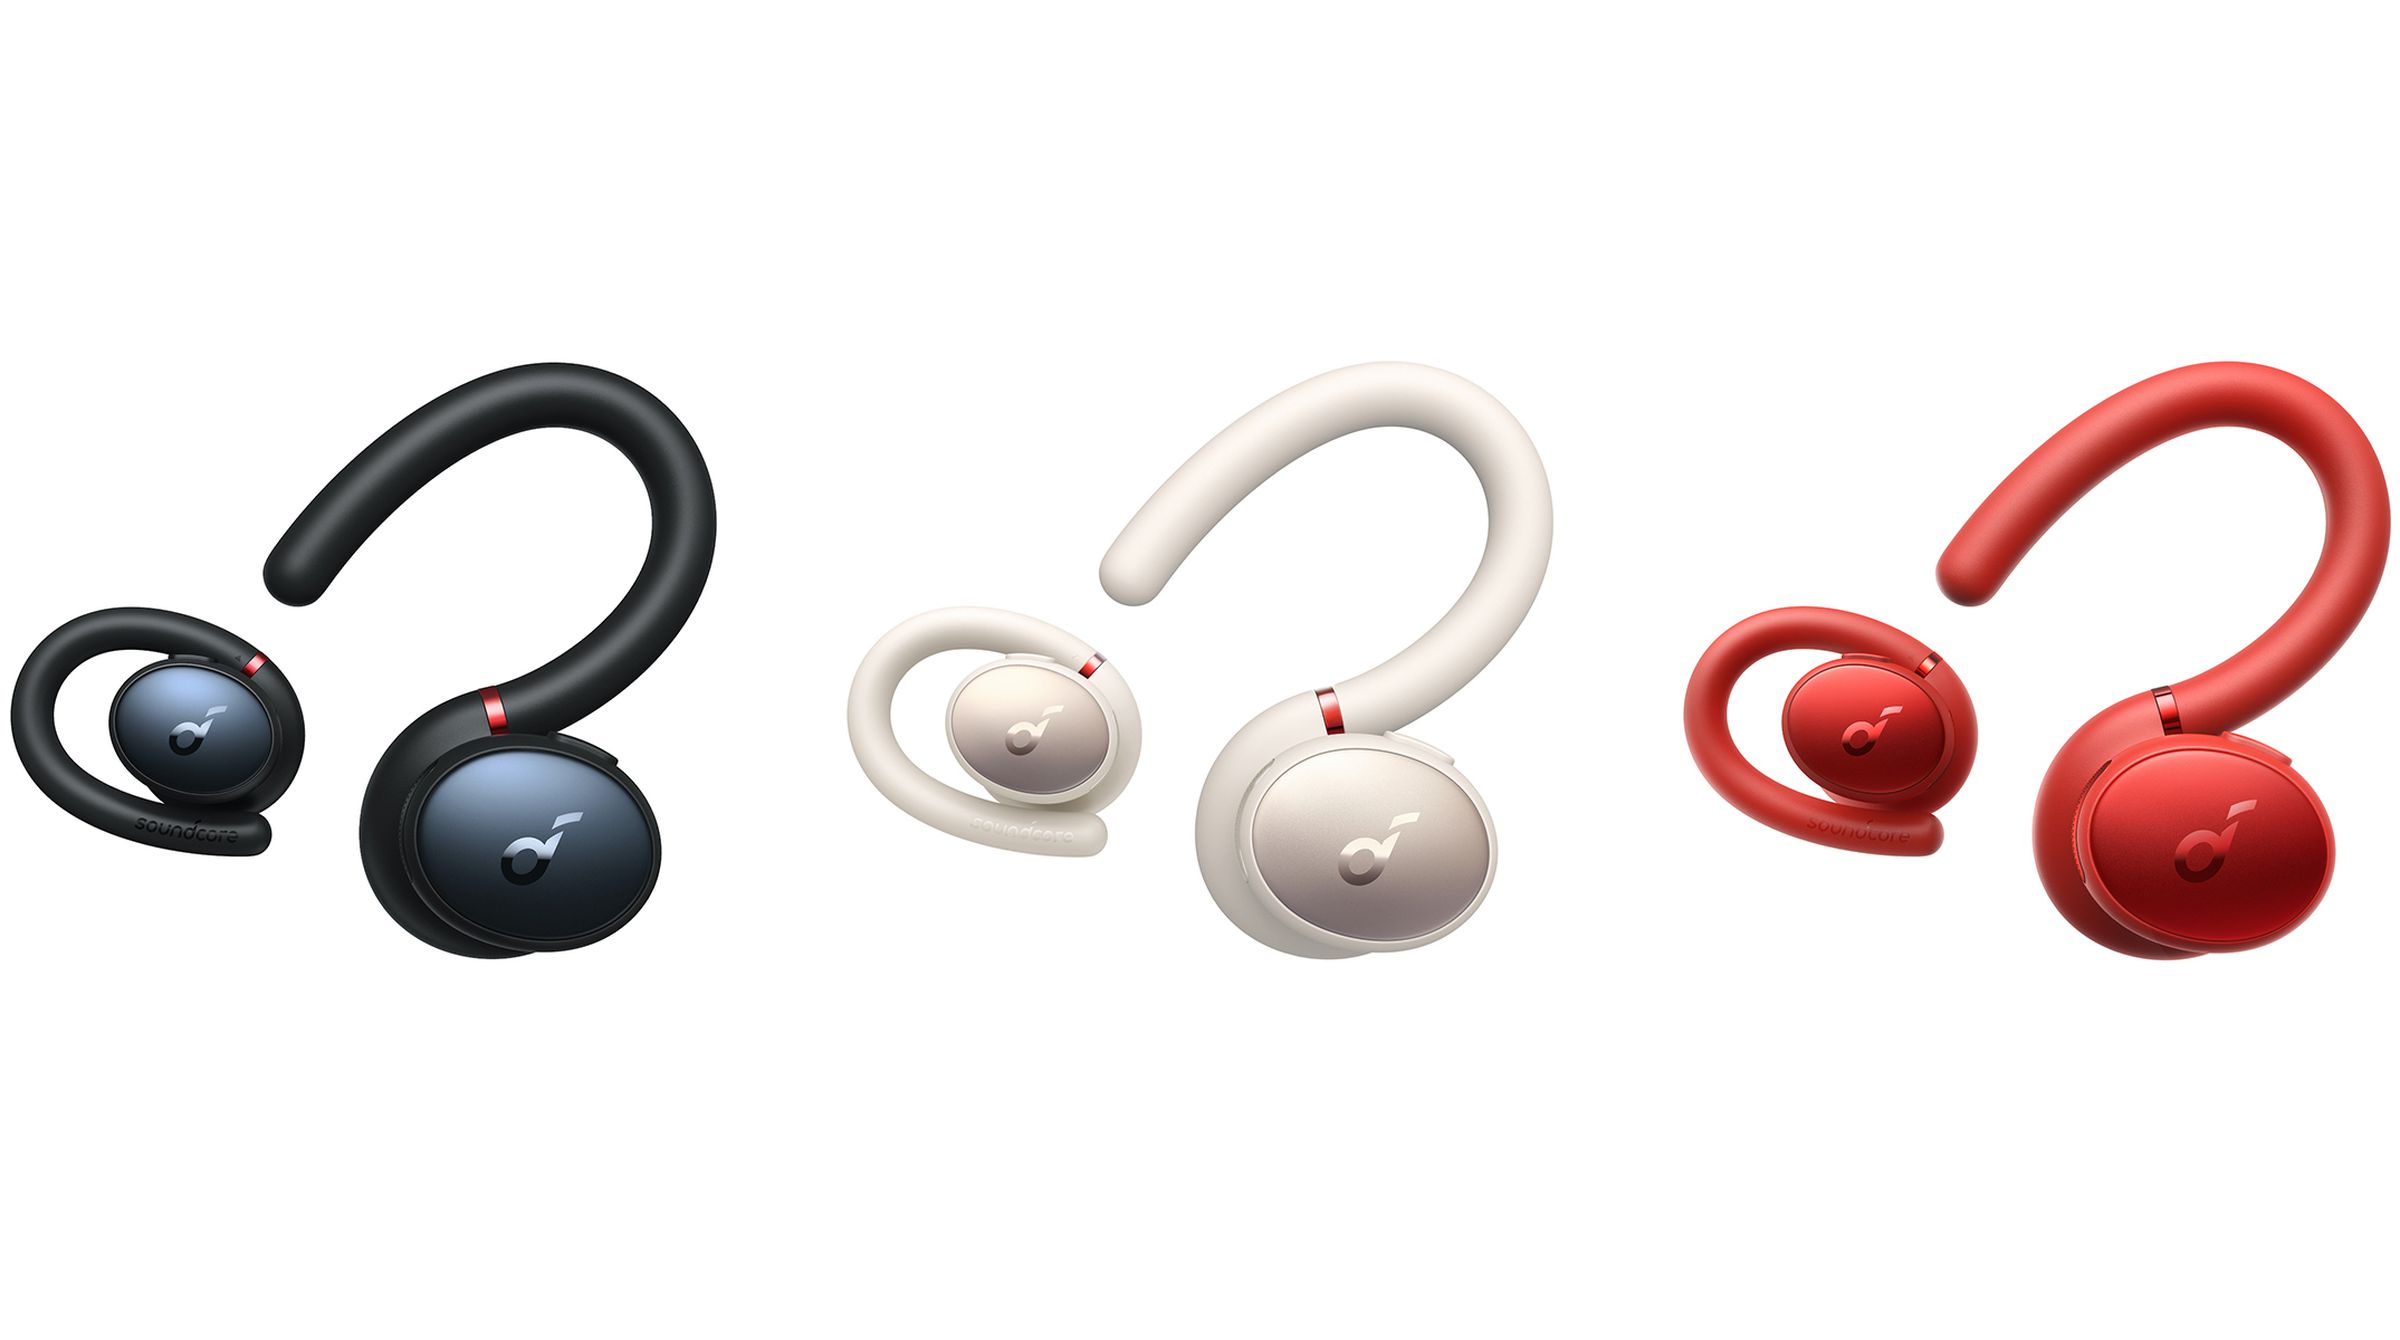 The silicone, rotating ear hooks allow these earbuds to fit into a compact carrying case. 